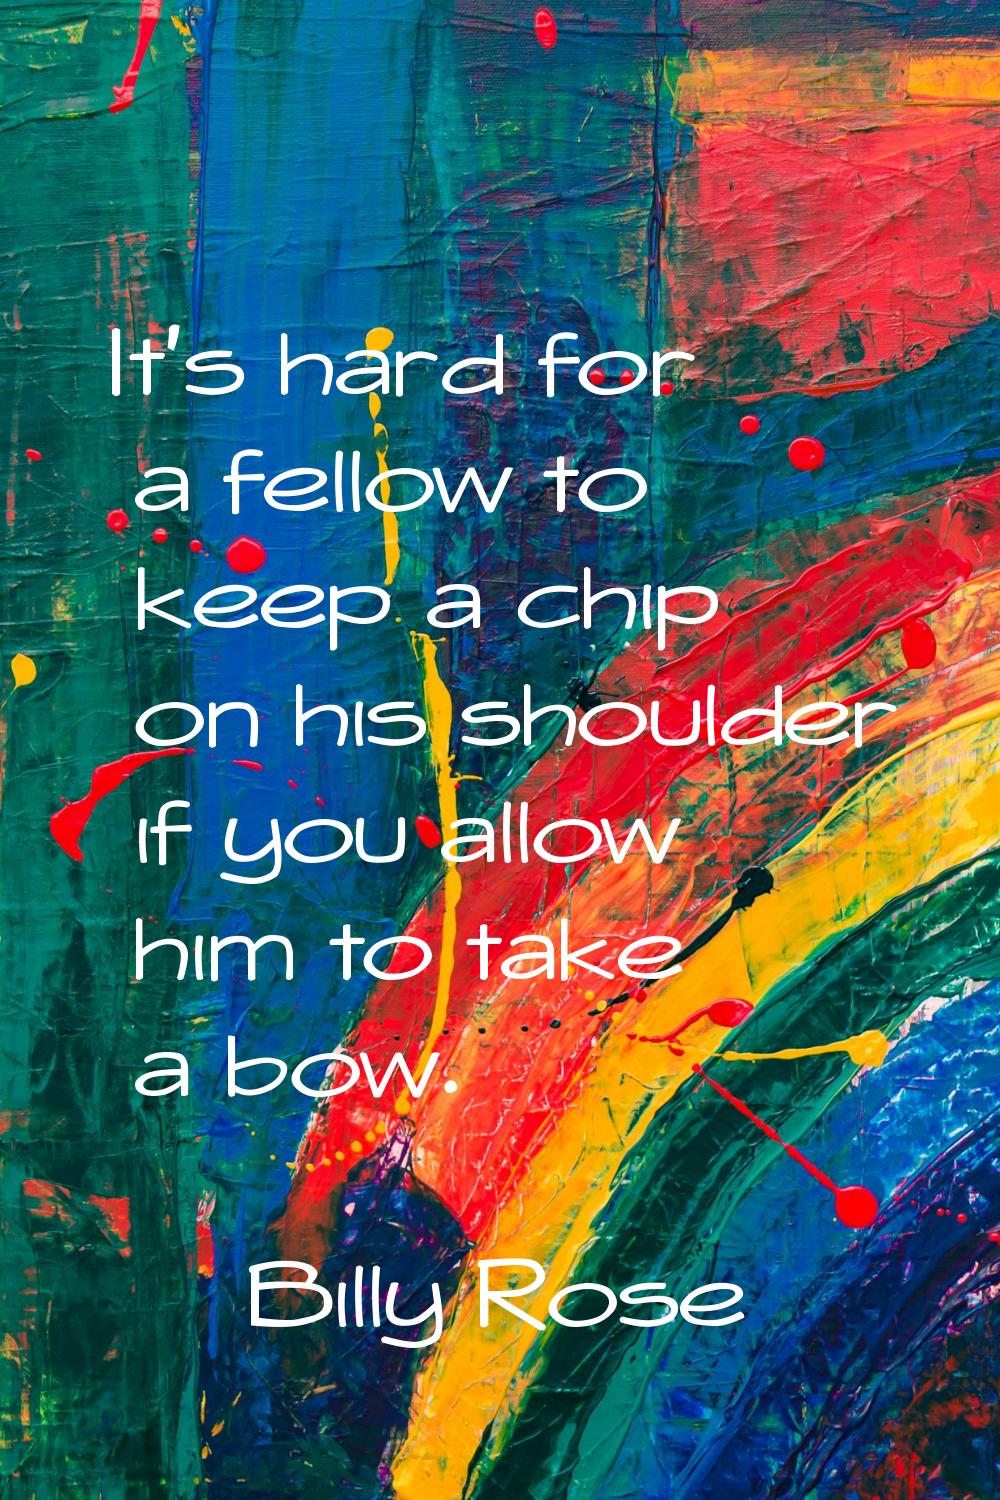 It's hard for a fellow to keep a chip on his shoulder if you allow him to take a bow.